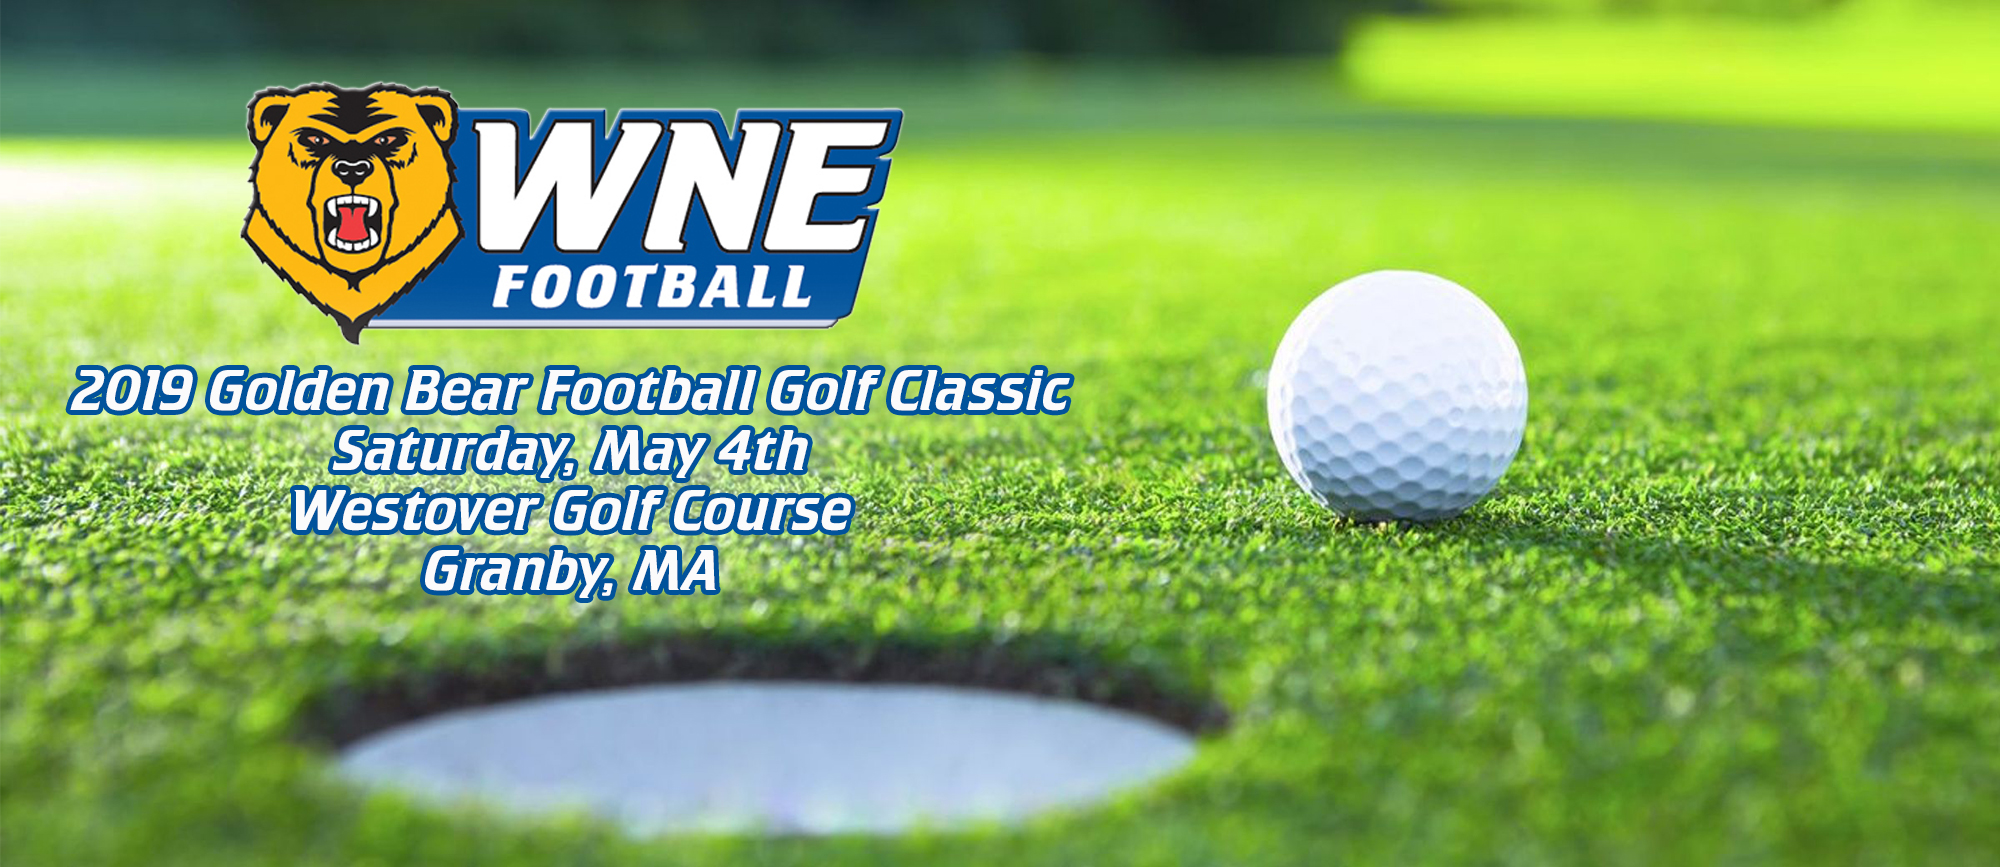 2019 Golden Bear Football Golf Classic Set for Saturday, May 4th